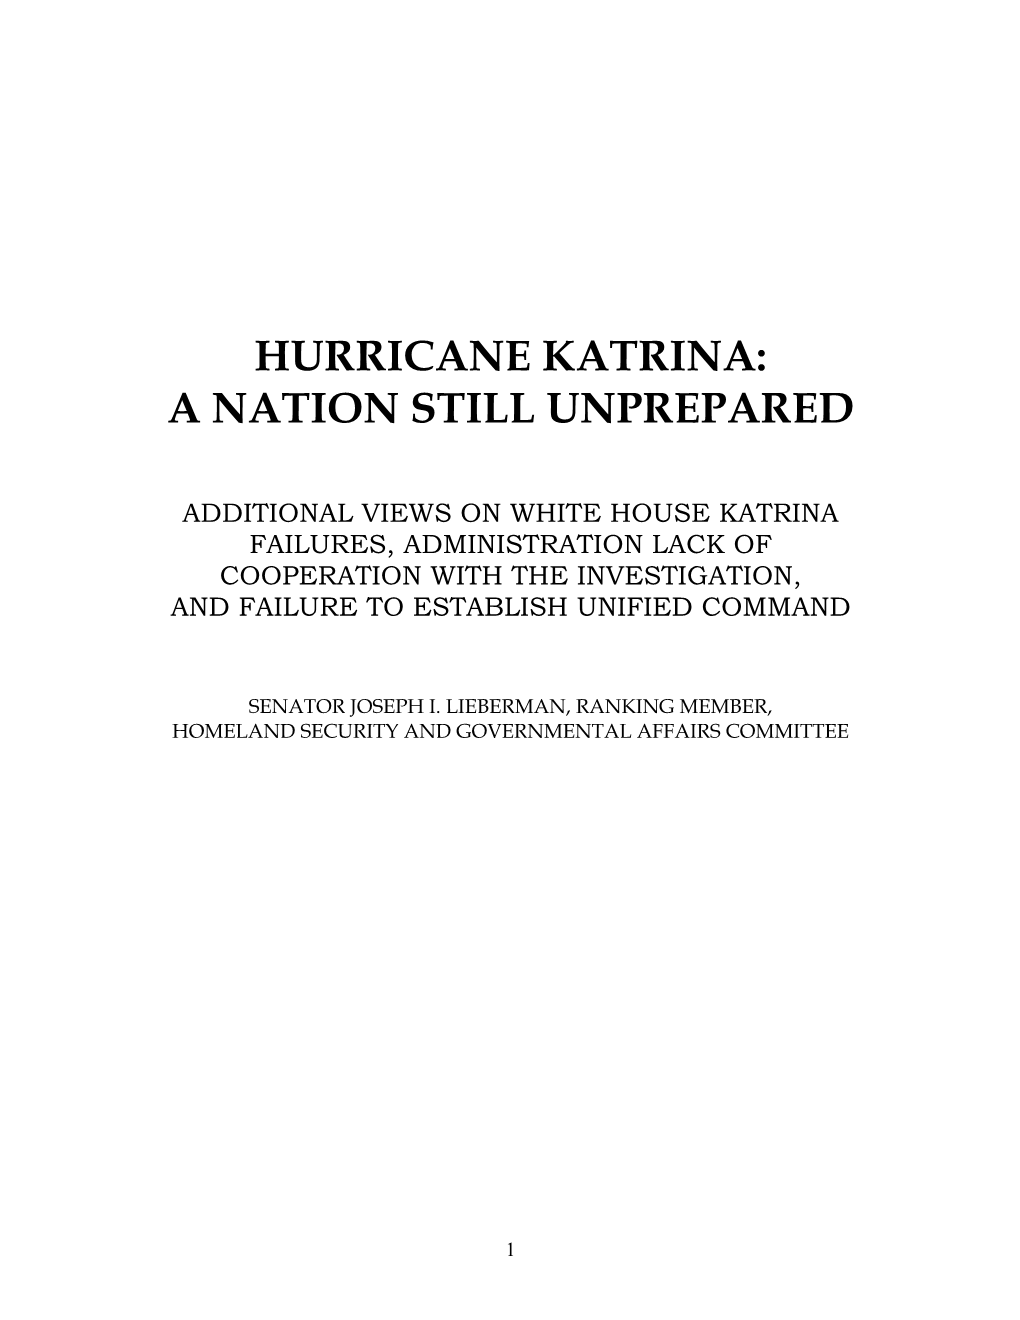 Additional Views on White House Katrina Failures, Administration Lack of Cooperation with the Investigation, and Failure to Establish Unified Command